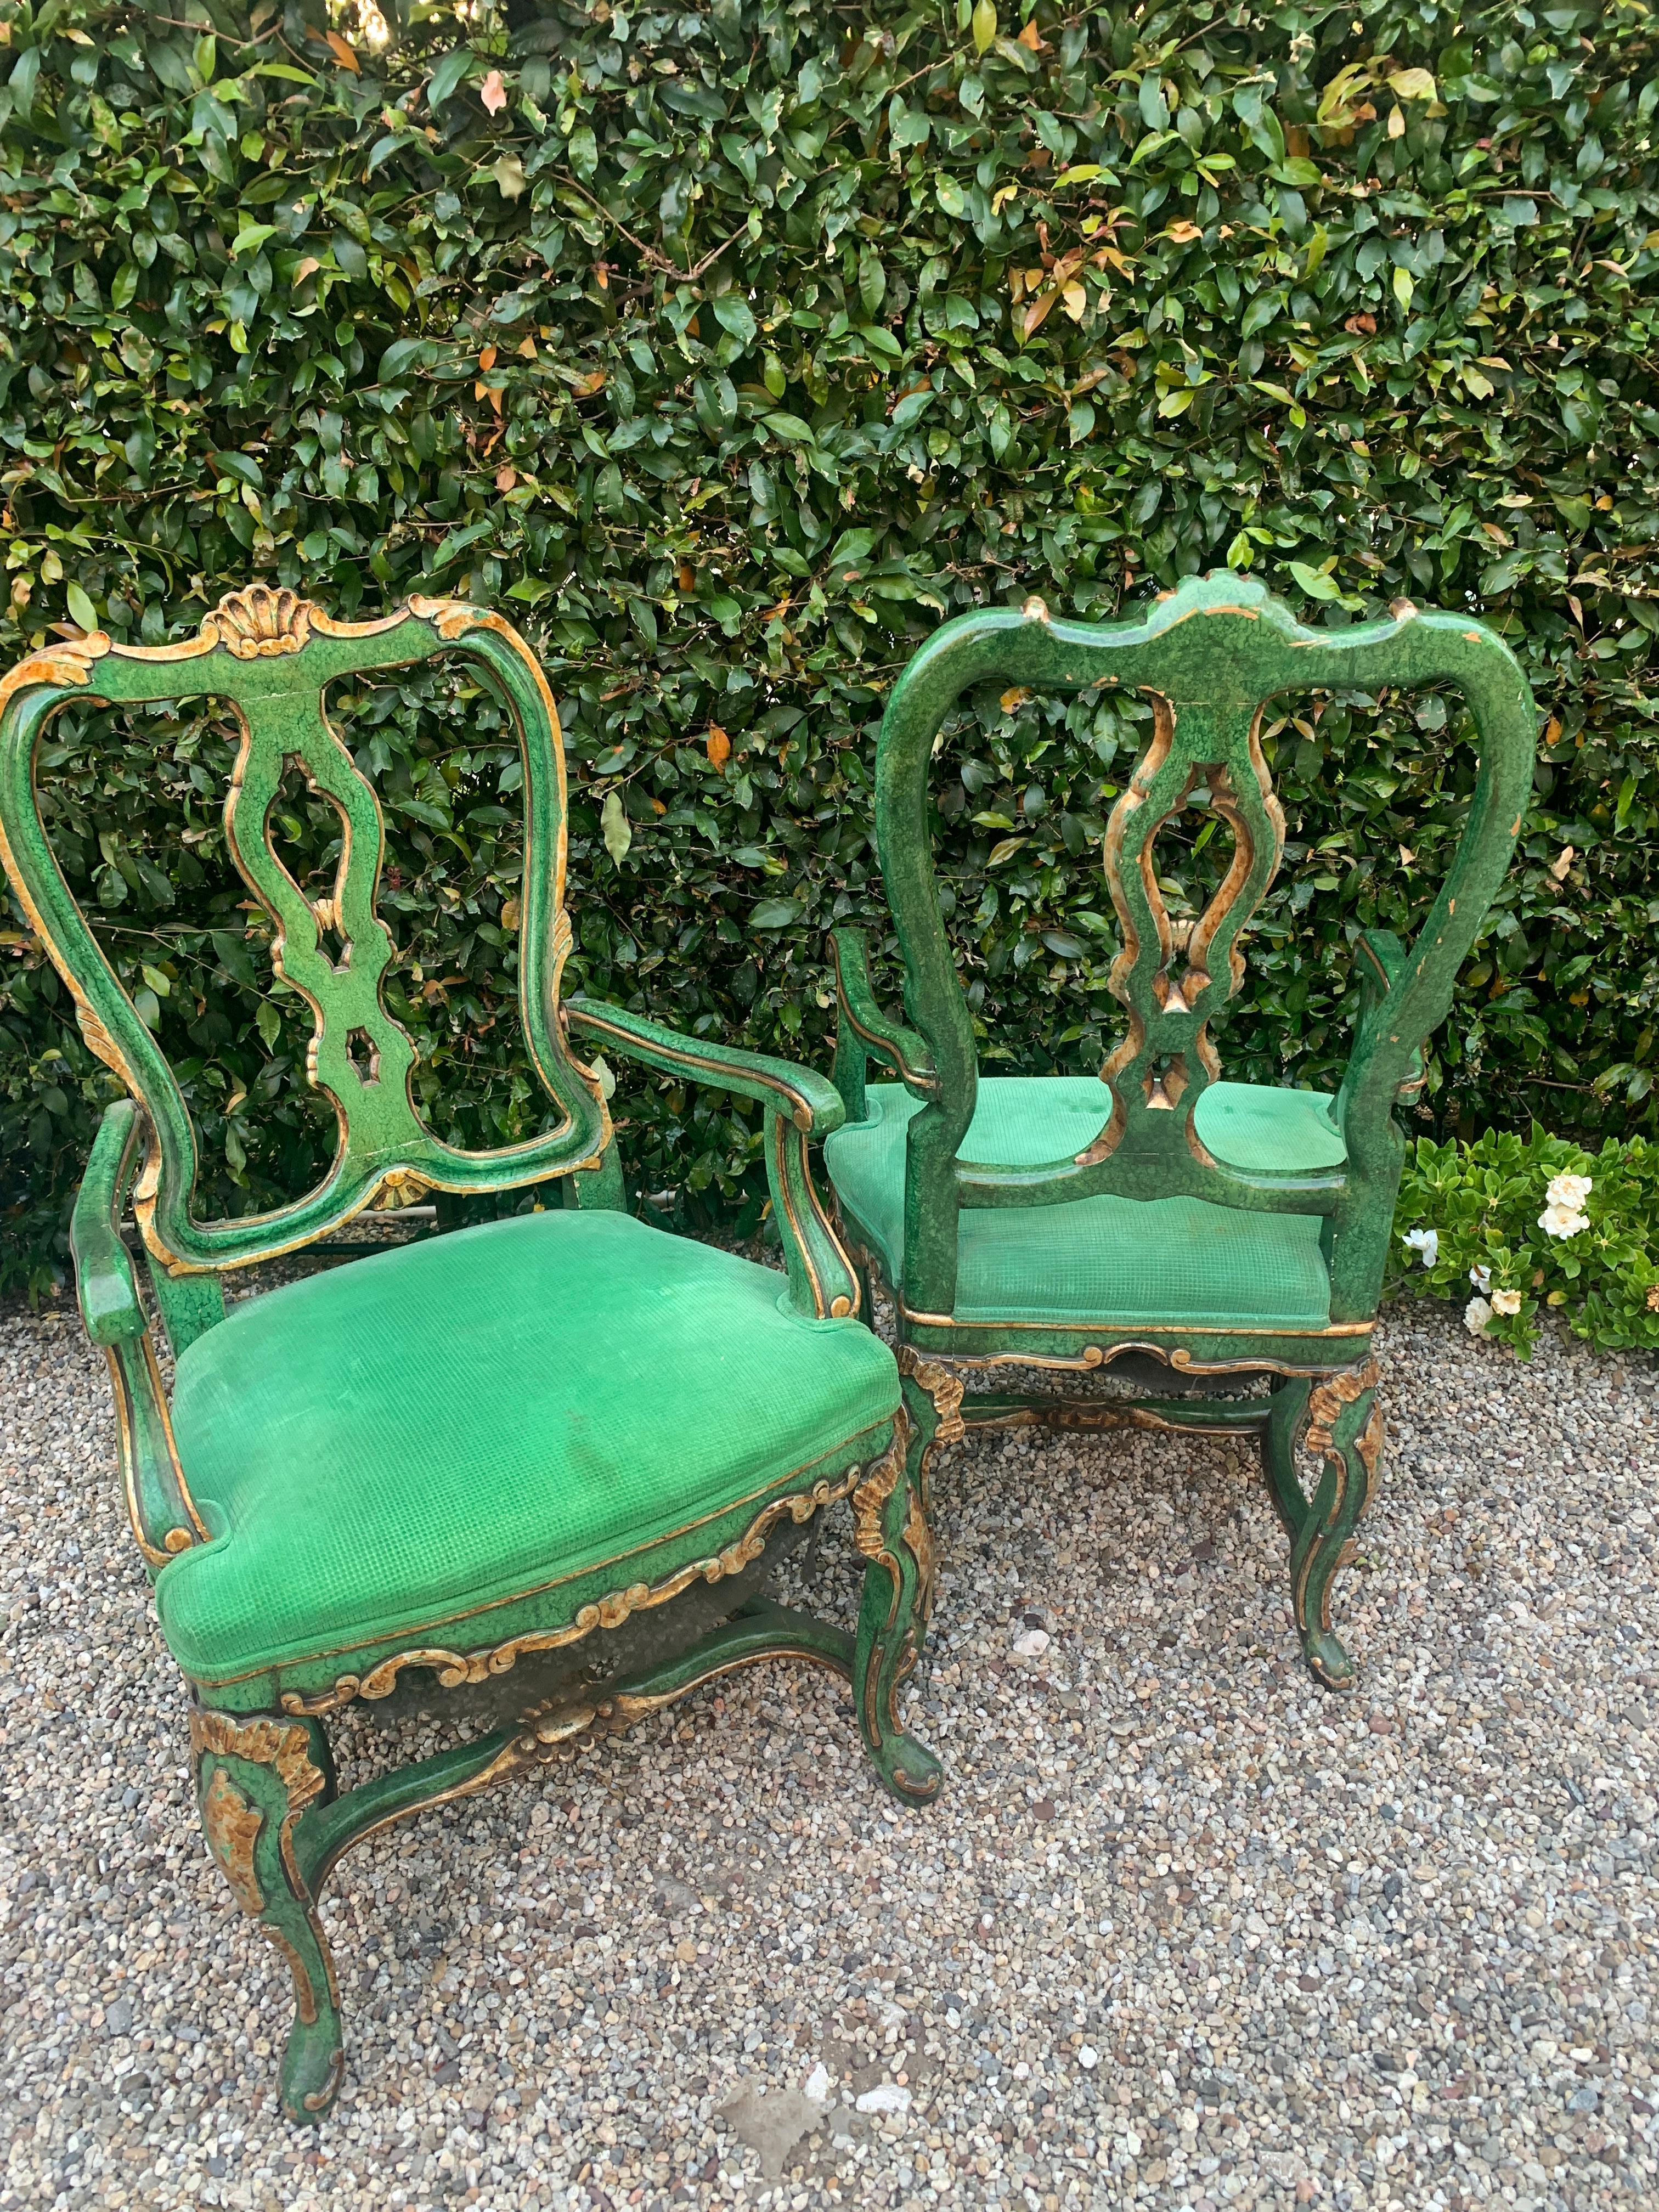 Pair of faux malachite chairs with gilt details, Georgian style armchairs with a wonderful presence. See images of some condition issues with finish, not offensive or out of character for this chair.